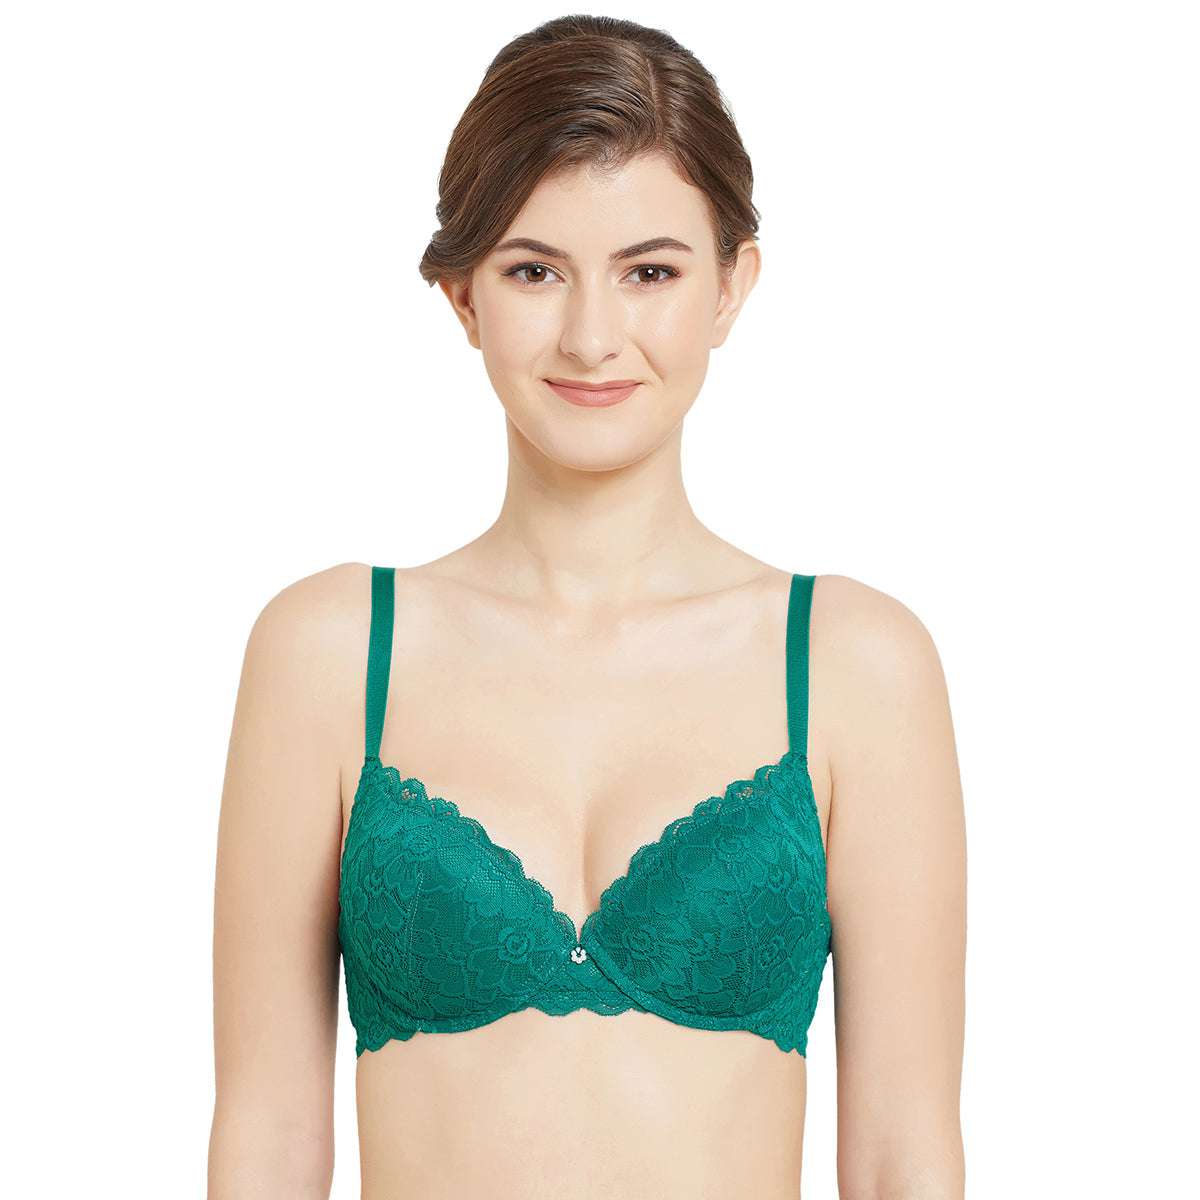 Plush Desire Push-Up Padded Wired 3/4th Cup Lacy Bra - Green